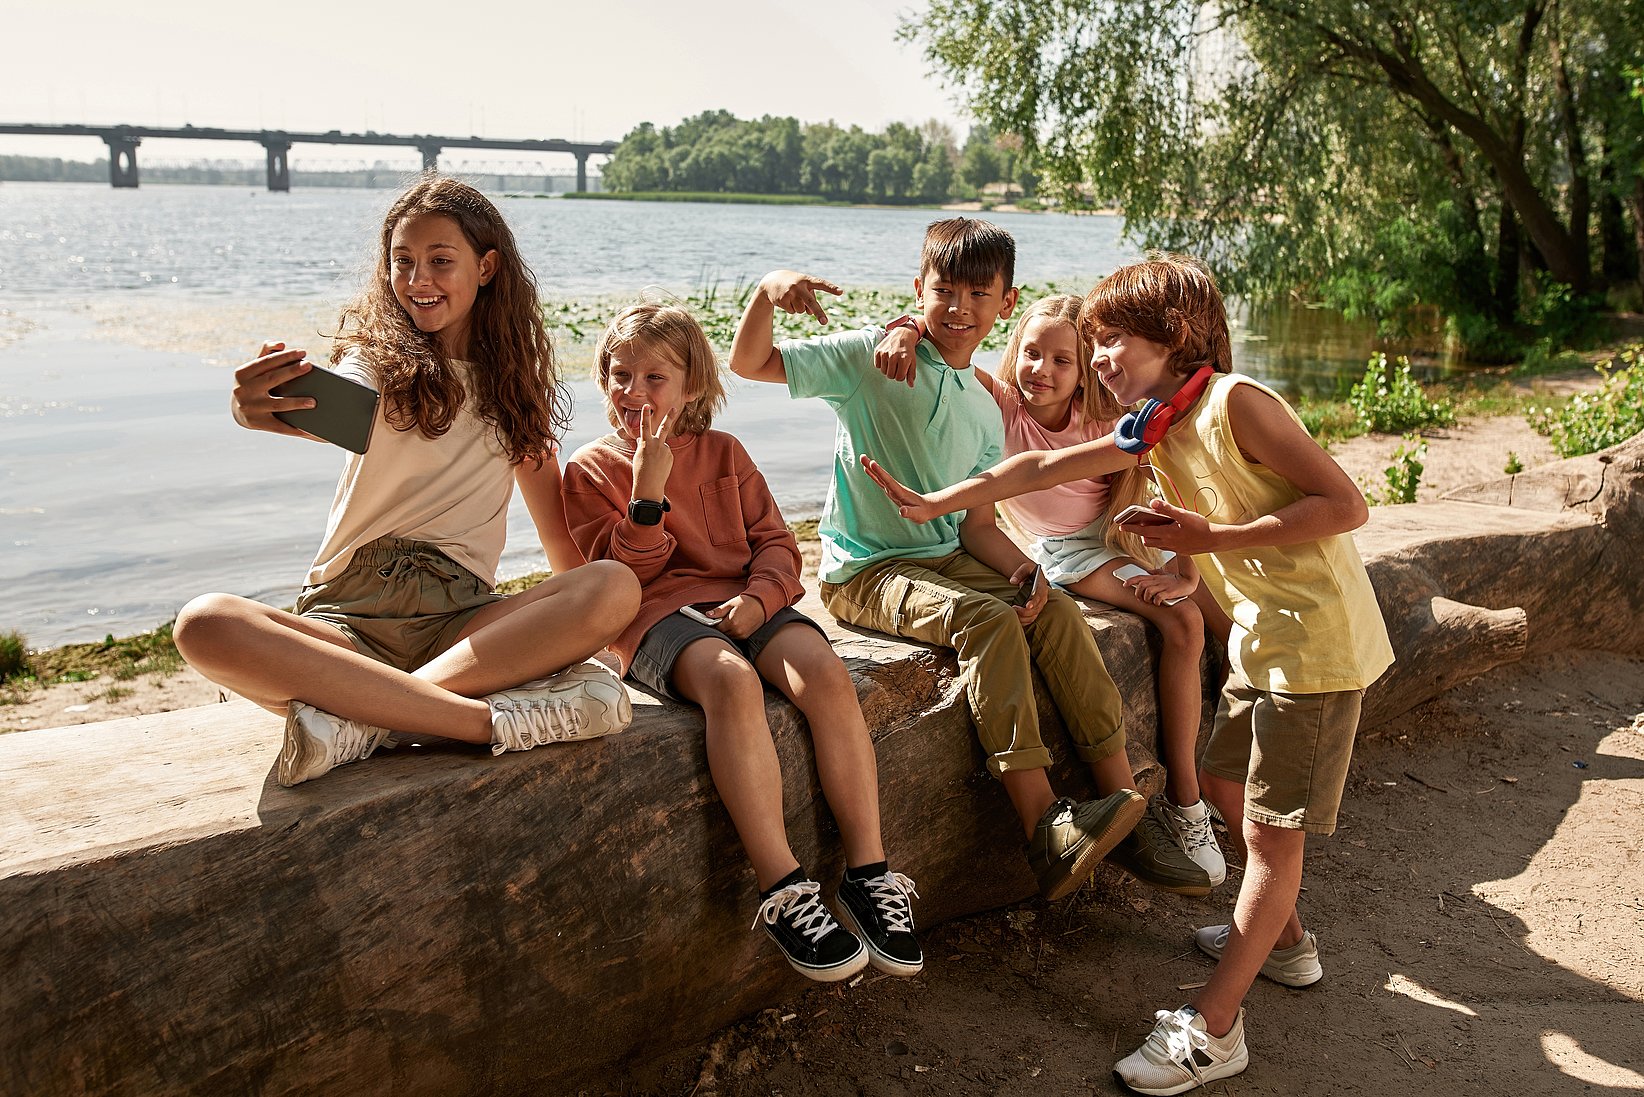 Two girls and three boys are sitting on a wall and making different faces while a girl takes the picture.